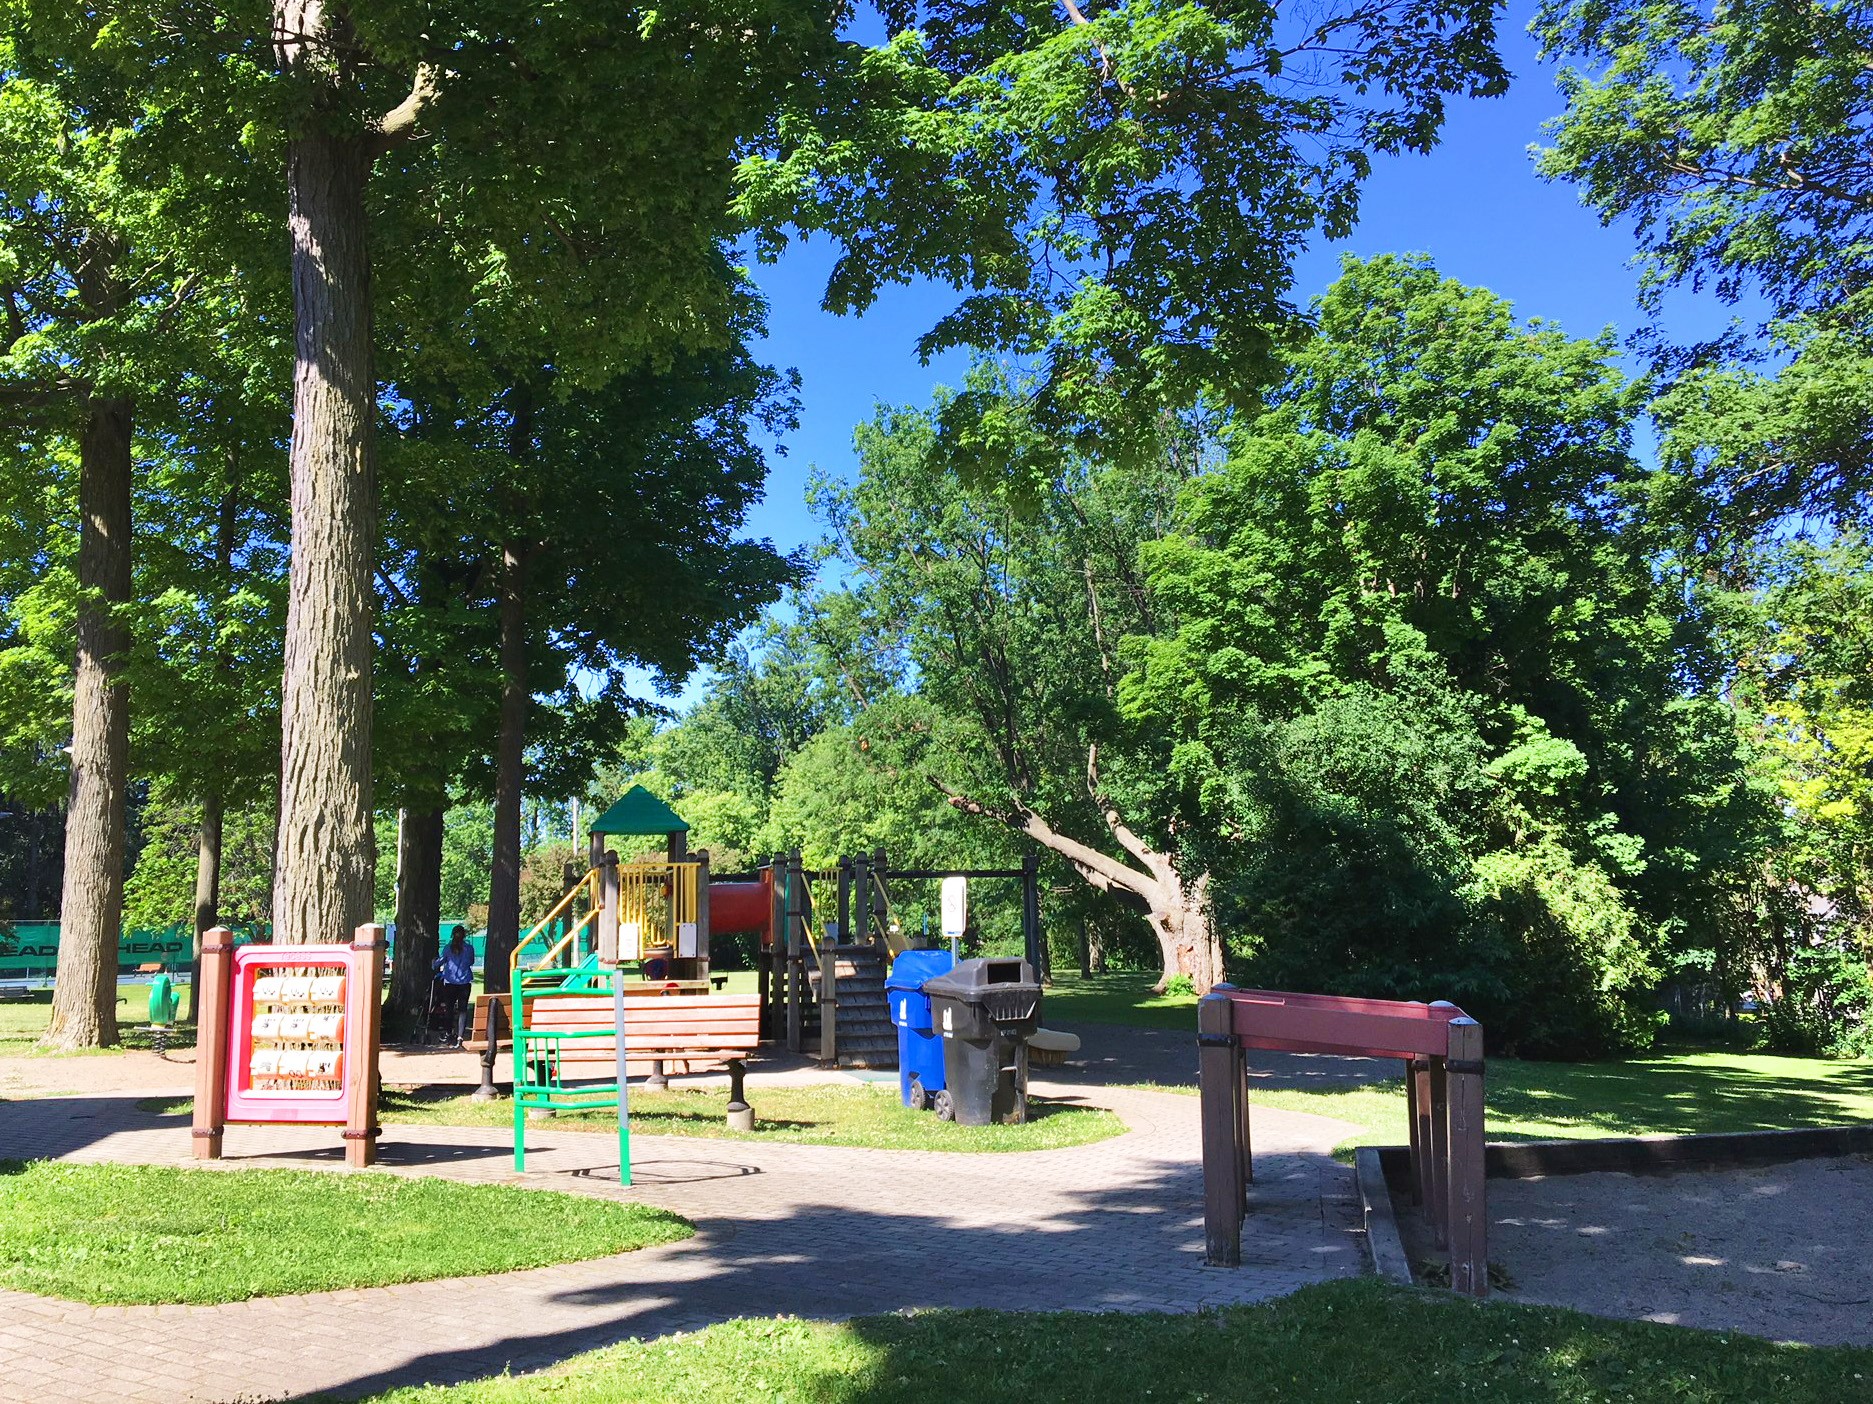 A photograph of Banbury Park Playground before improvements, which shows various stand-alone play features around the playground area, with a medium sized play structure in the background. The playground is surrounded by mature trees and various pathways.